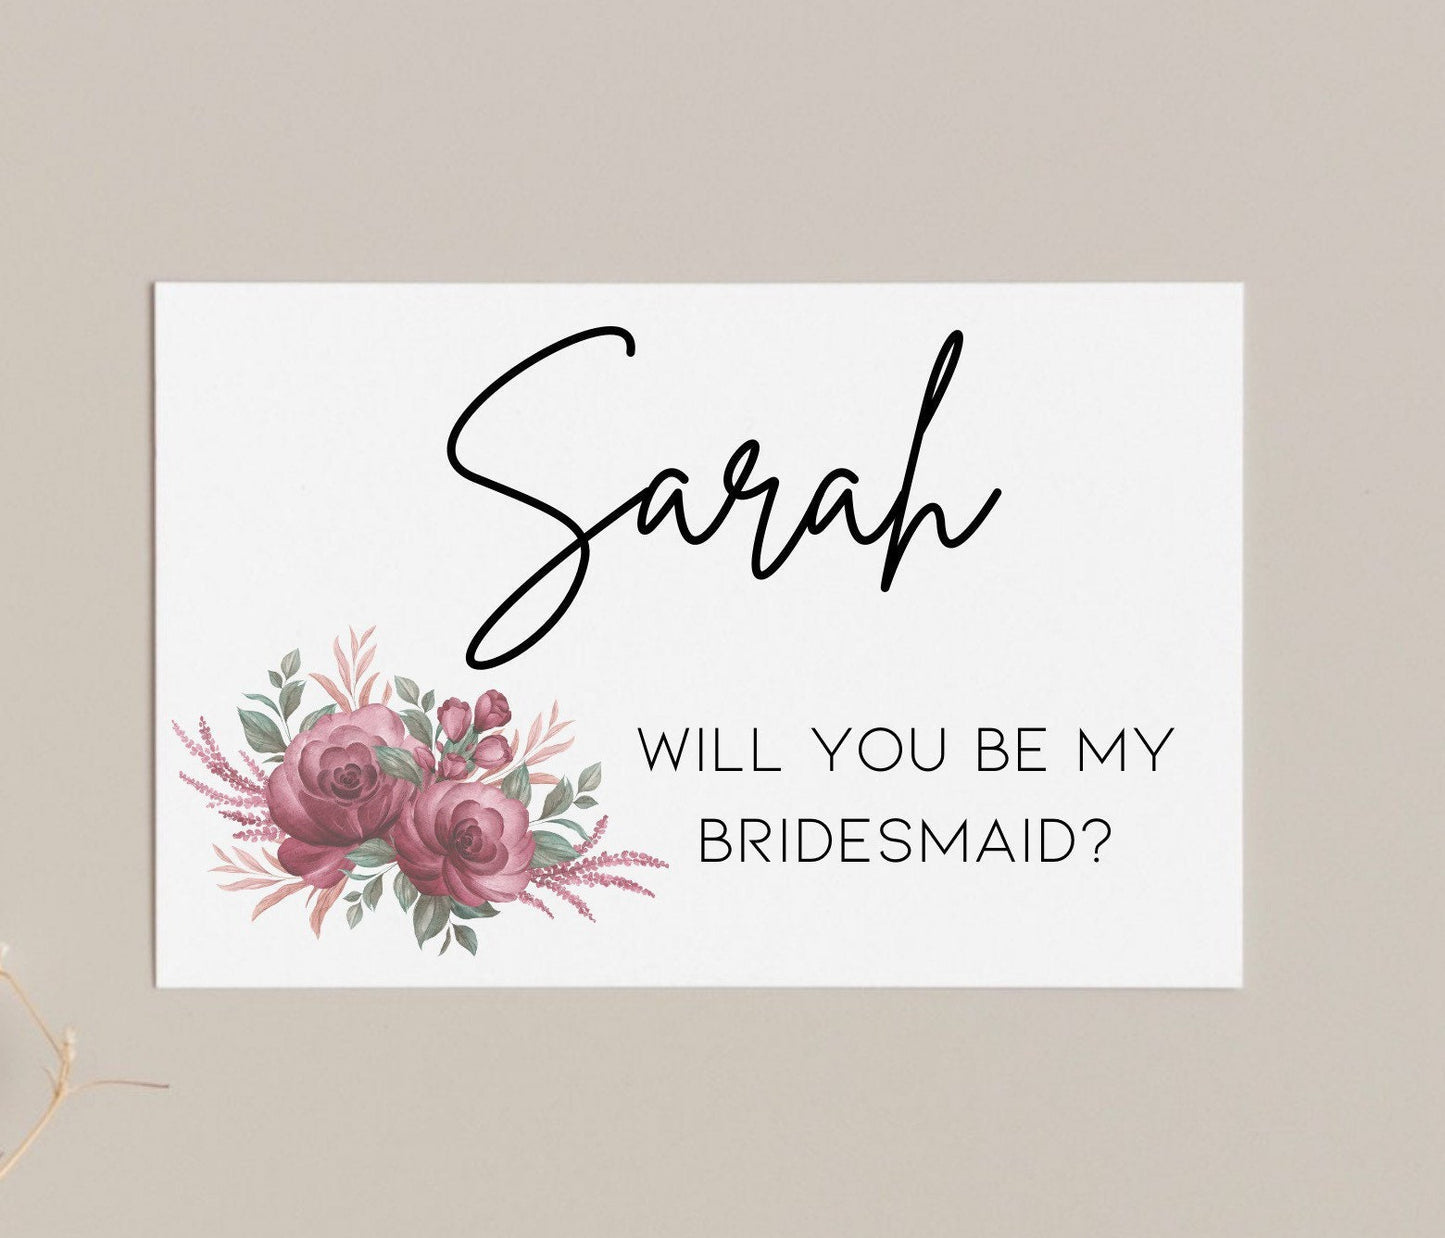 Will you be my bridesmaid card, personalised wedding proposal card, floral design bridal party card, maid of honour, flower girl proposal